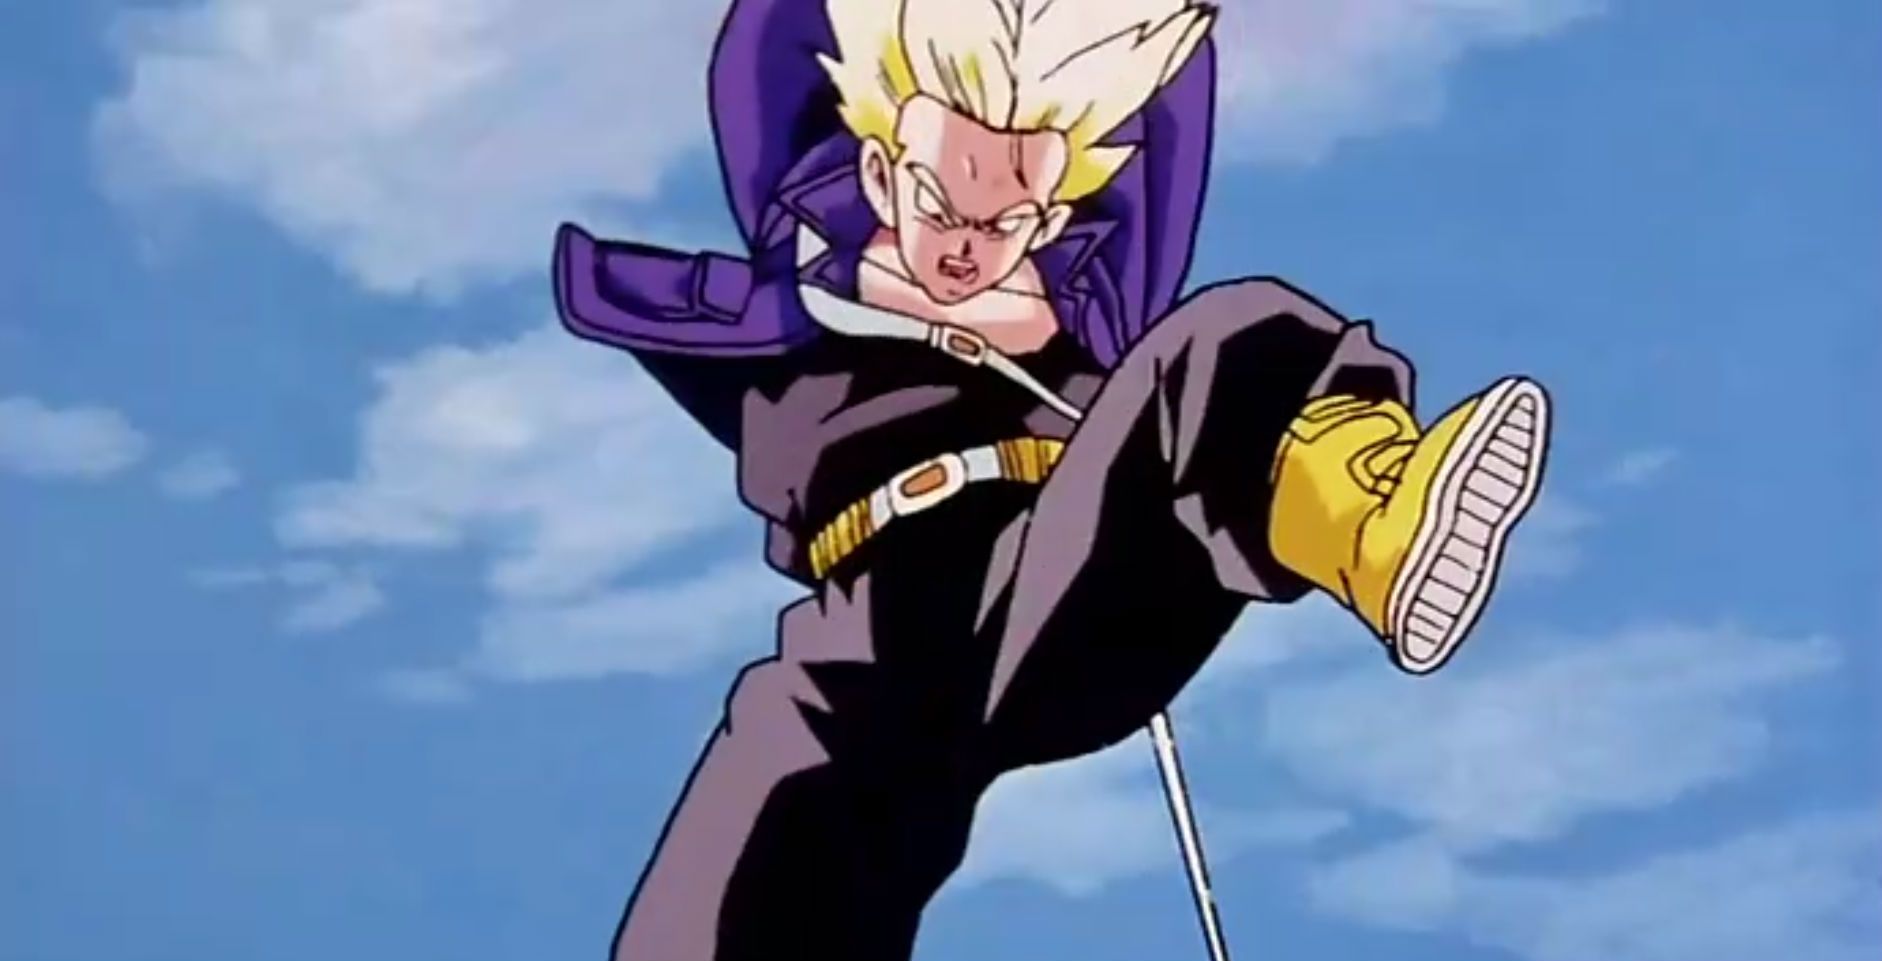 Future Trunks from Dragon Ball Z ready to swing his sword